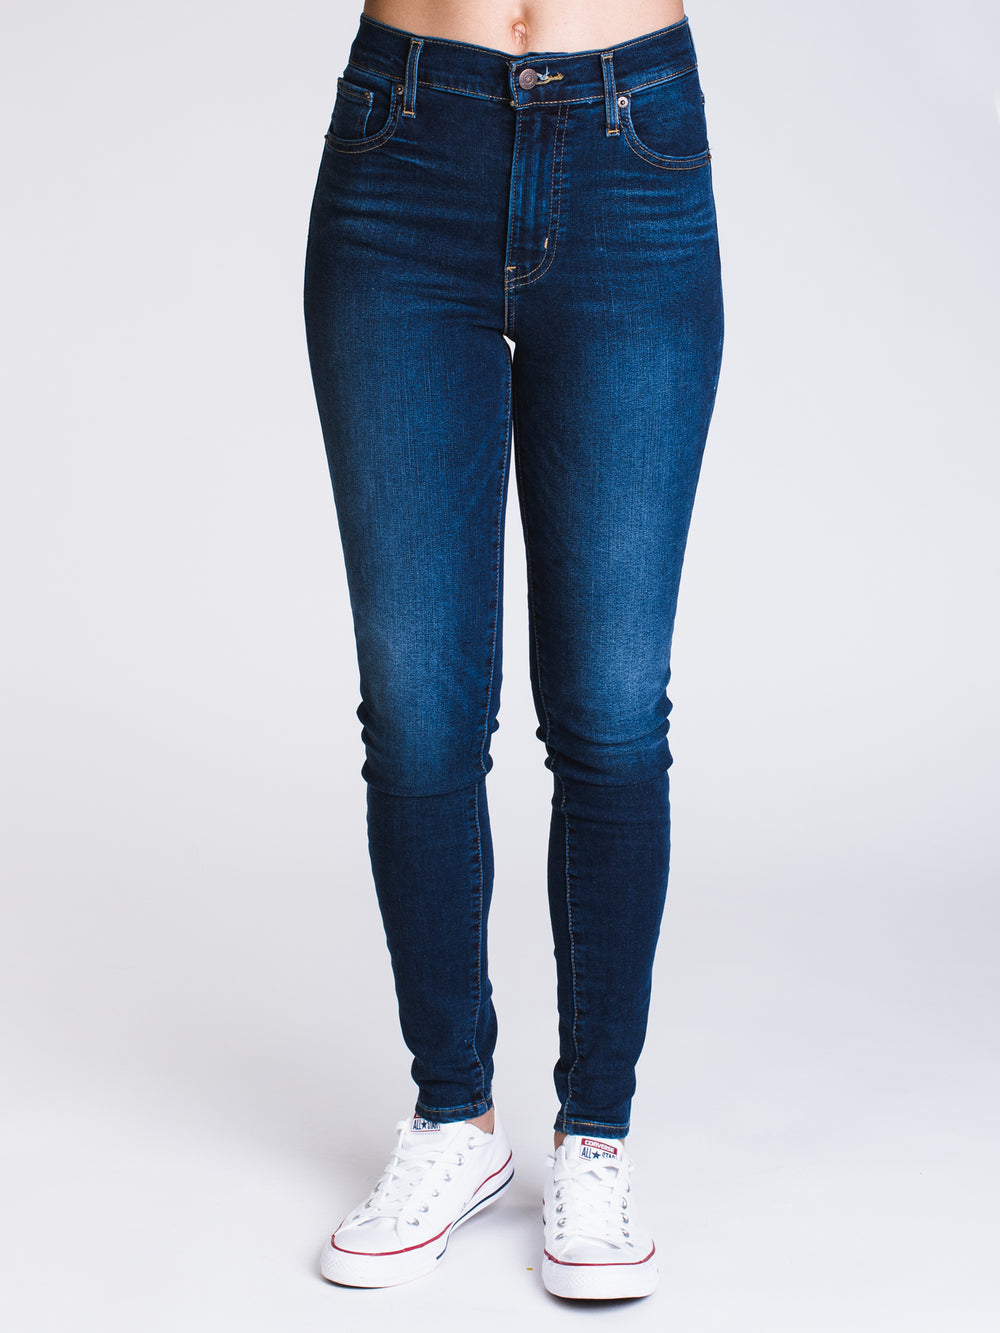 WOMENS MILE HIGH SUPER SKINNY - DEN - CLEARANCE